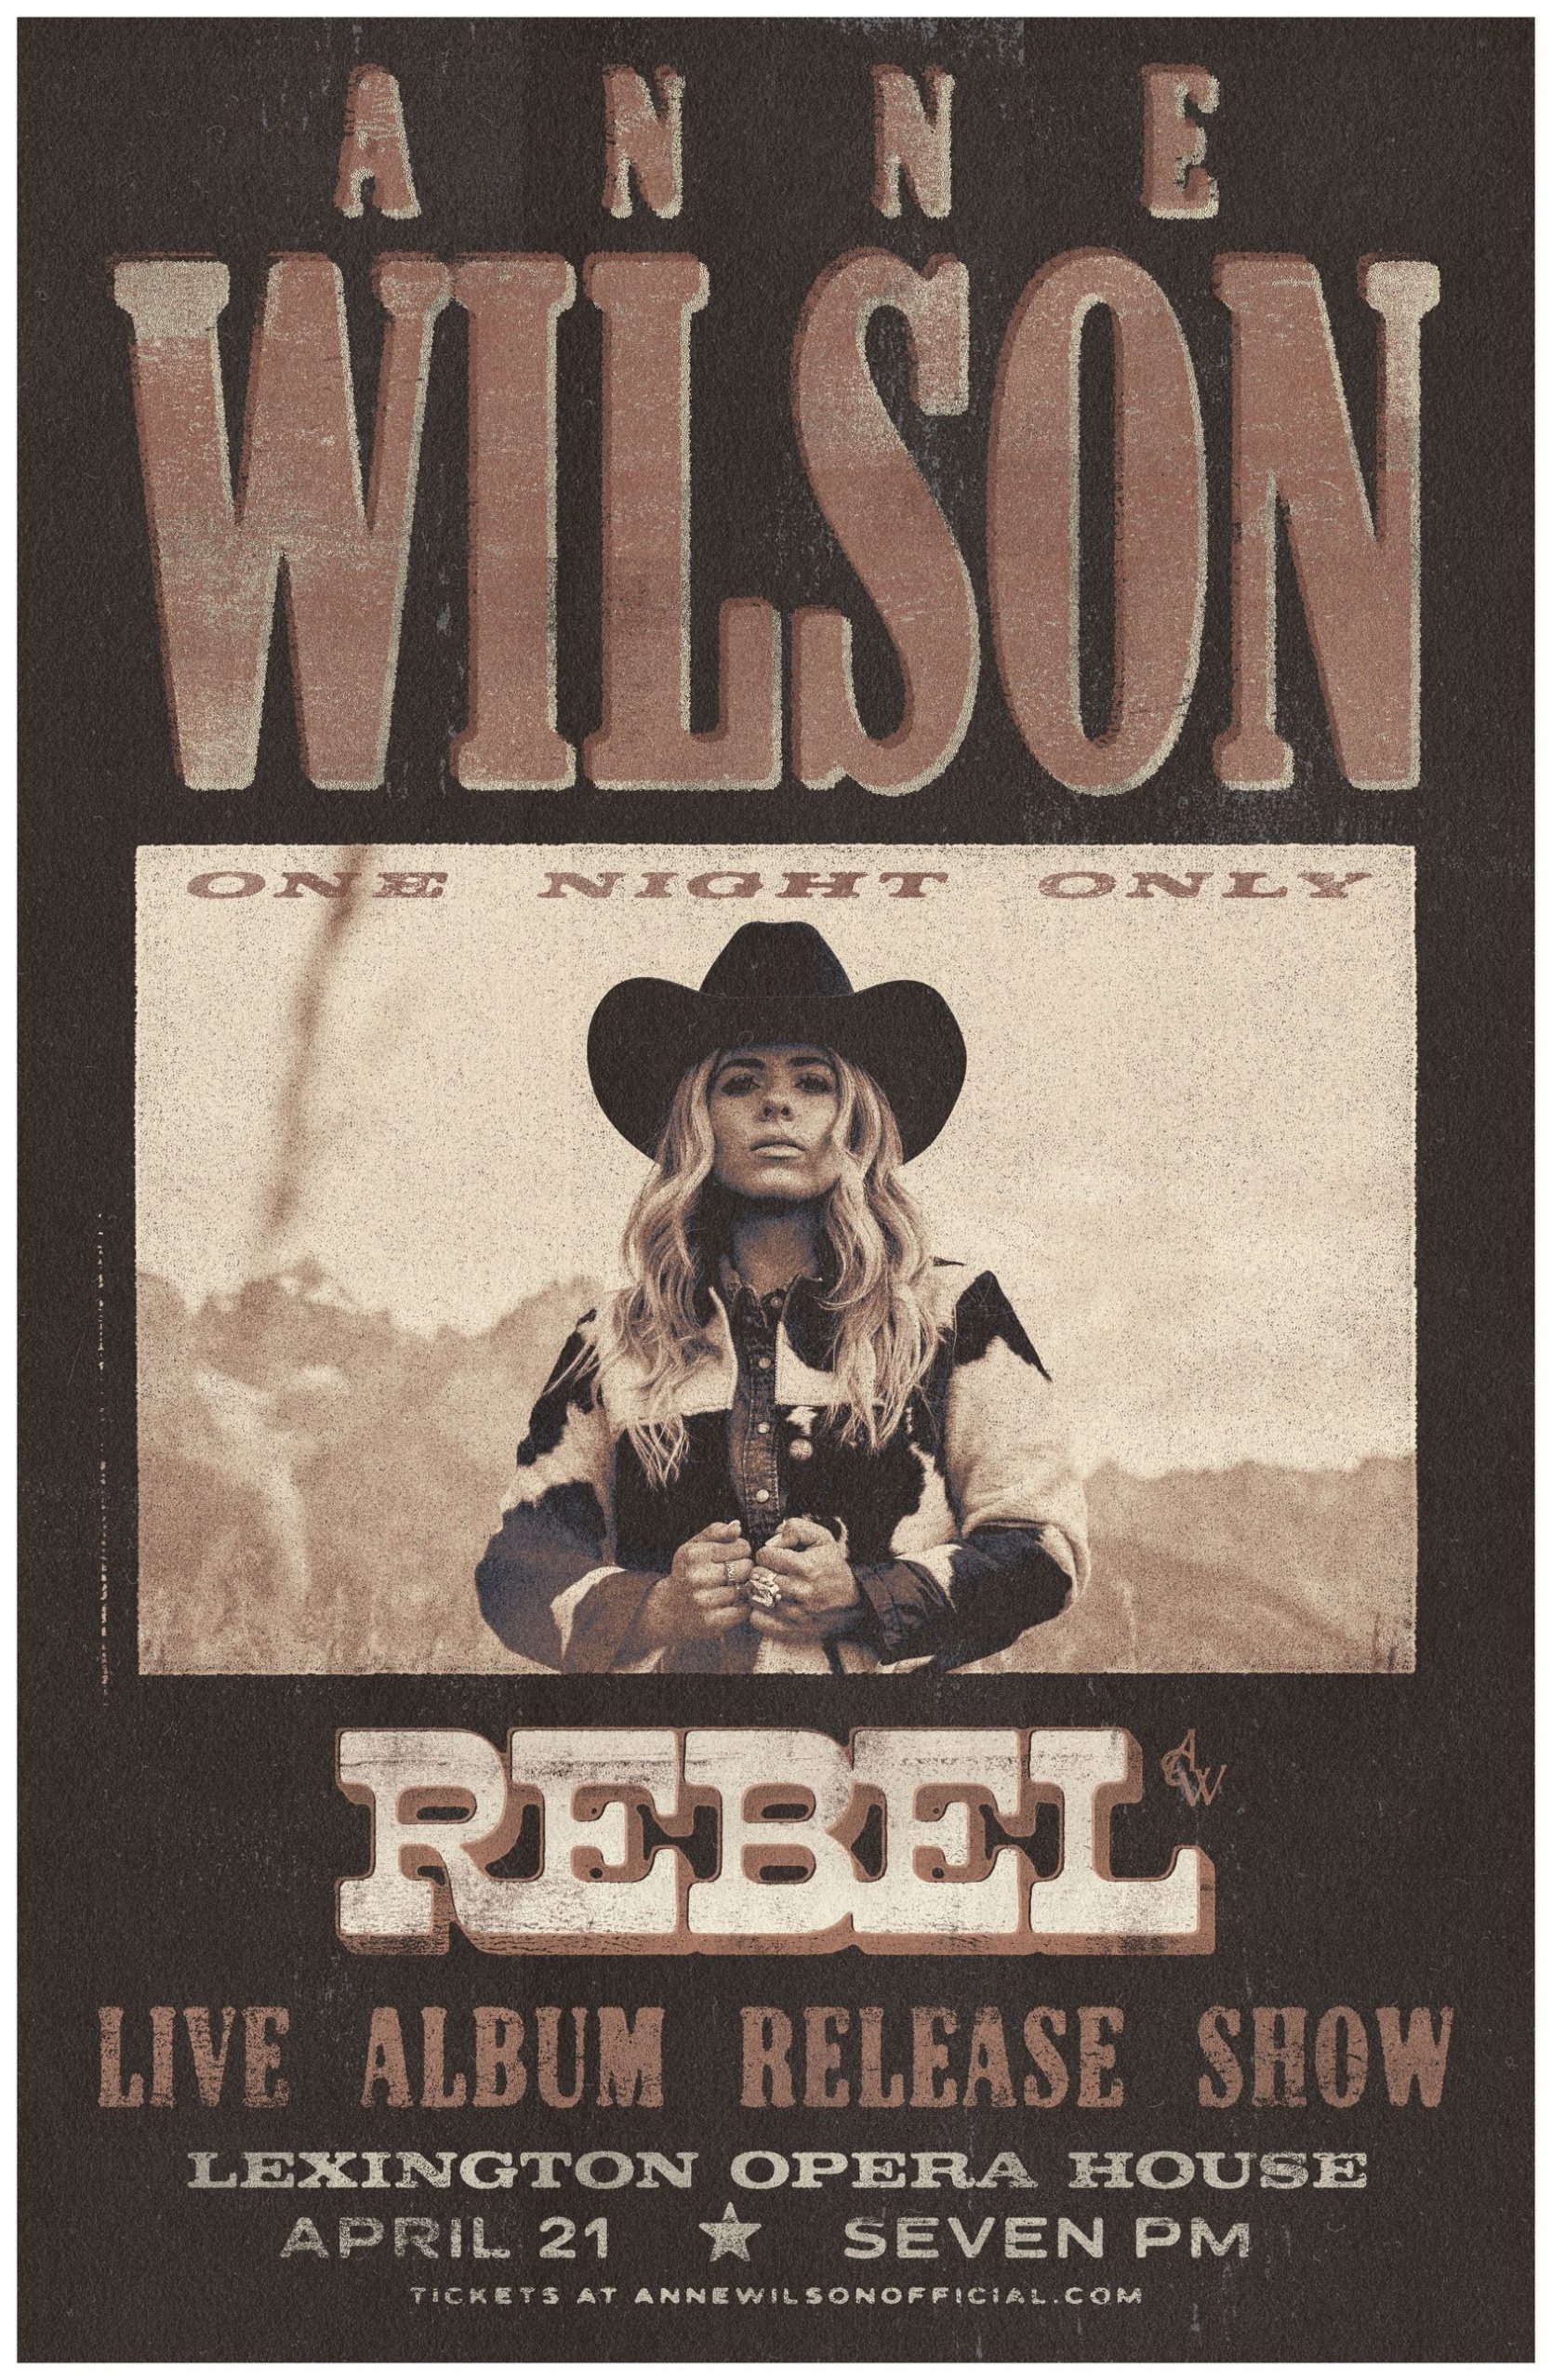 ANNE WILSON’S HOMETOWN ALBUM RELEASE SHOW IN LEXINGTON, FOR NEW ALBUM ‘REBEL’, SELLS OUT DURING FAN PRESALE